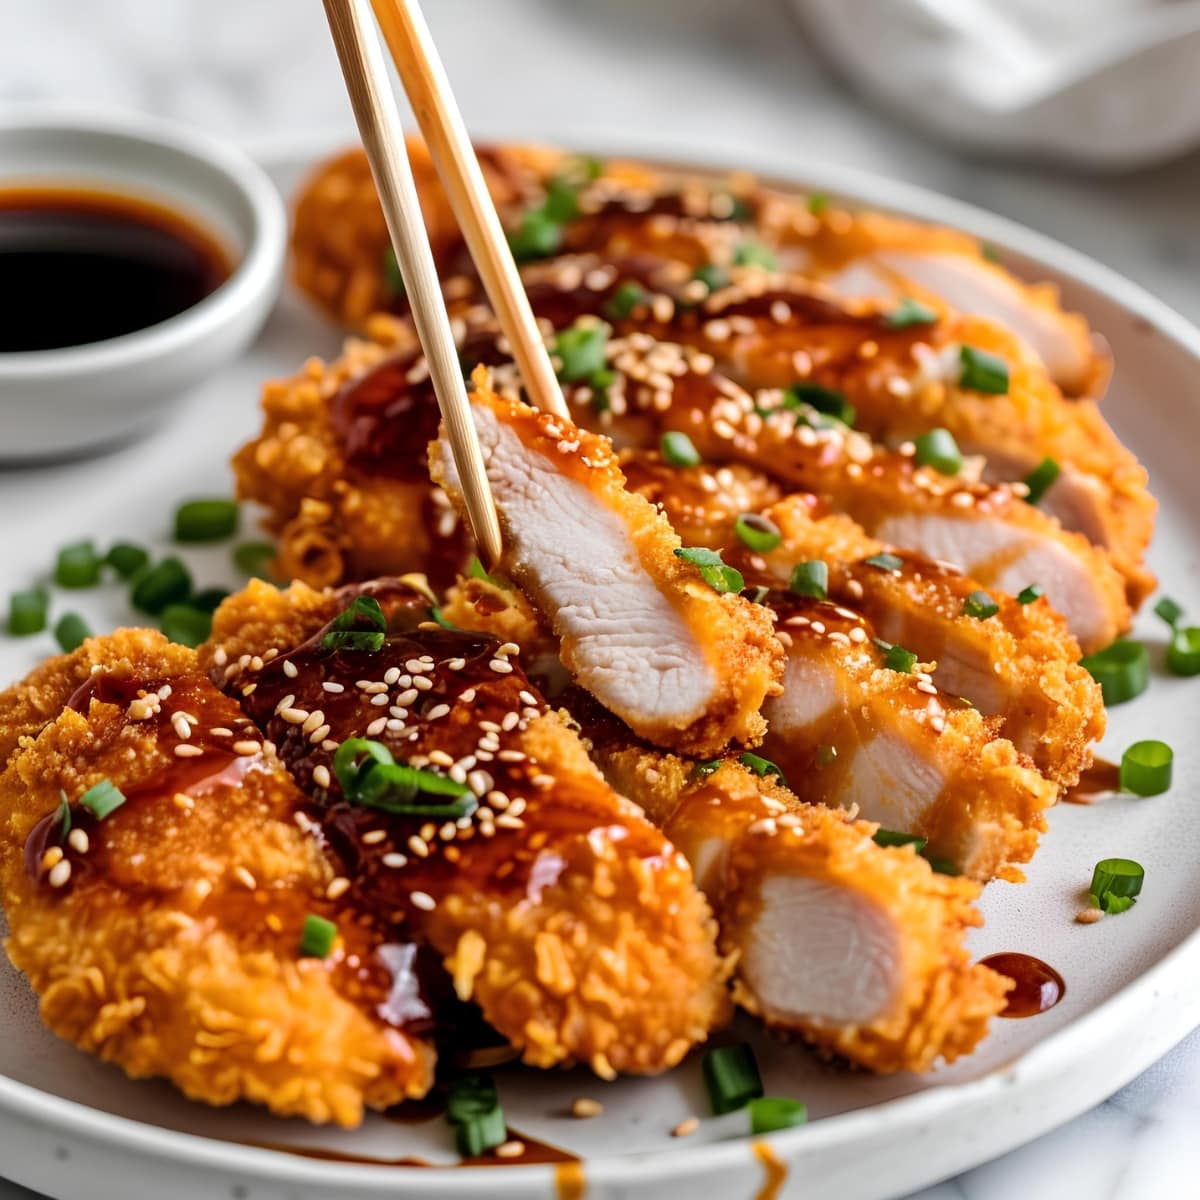 Crispy chicken katsu with sesame seeds and green onions with dipping sauce